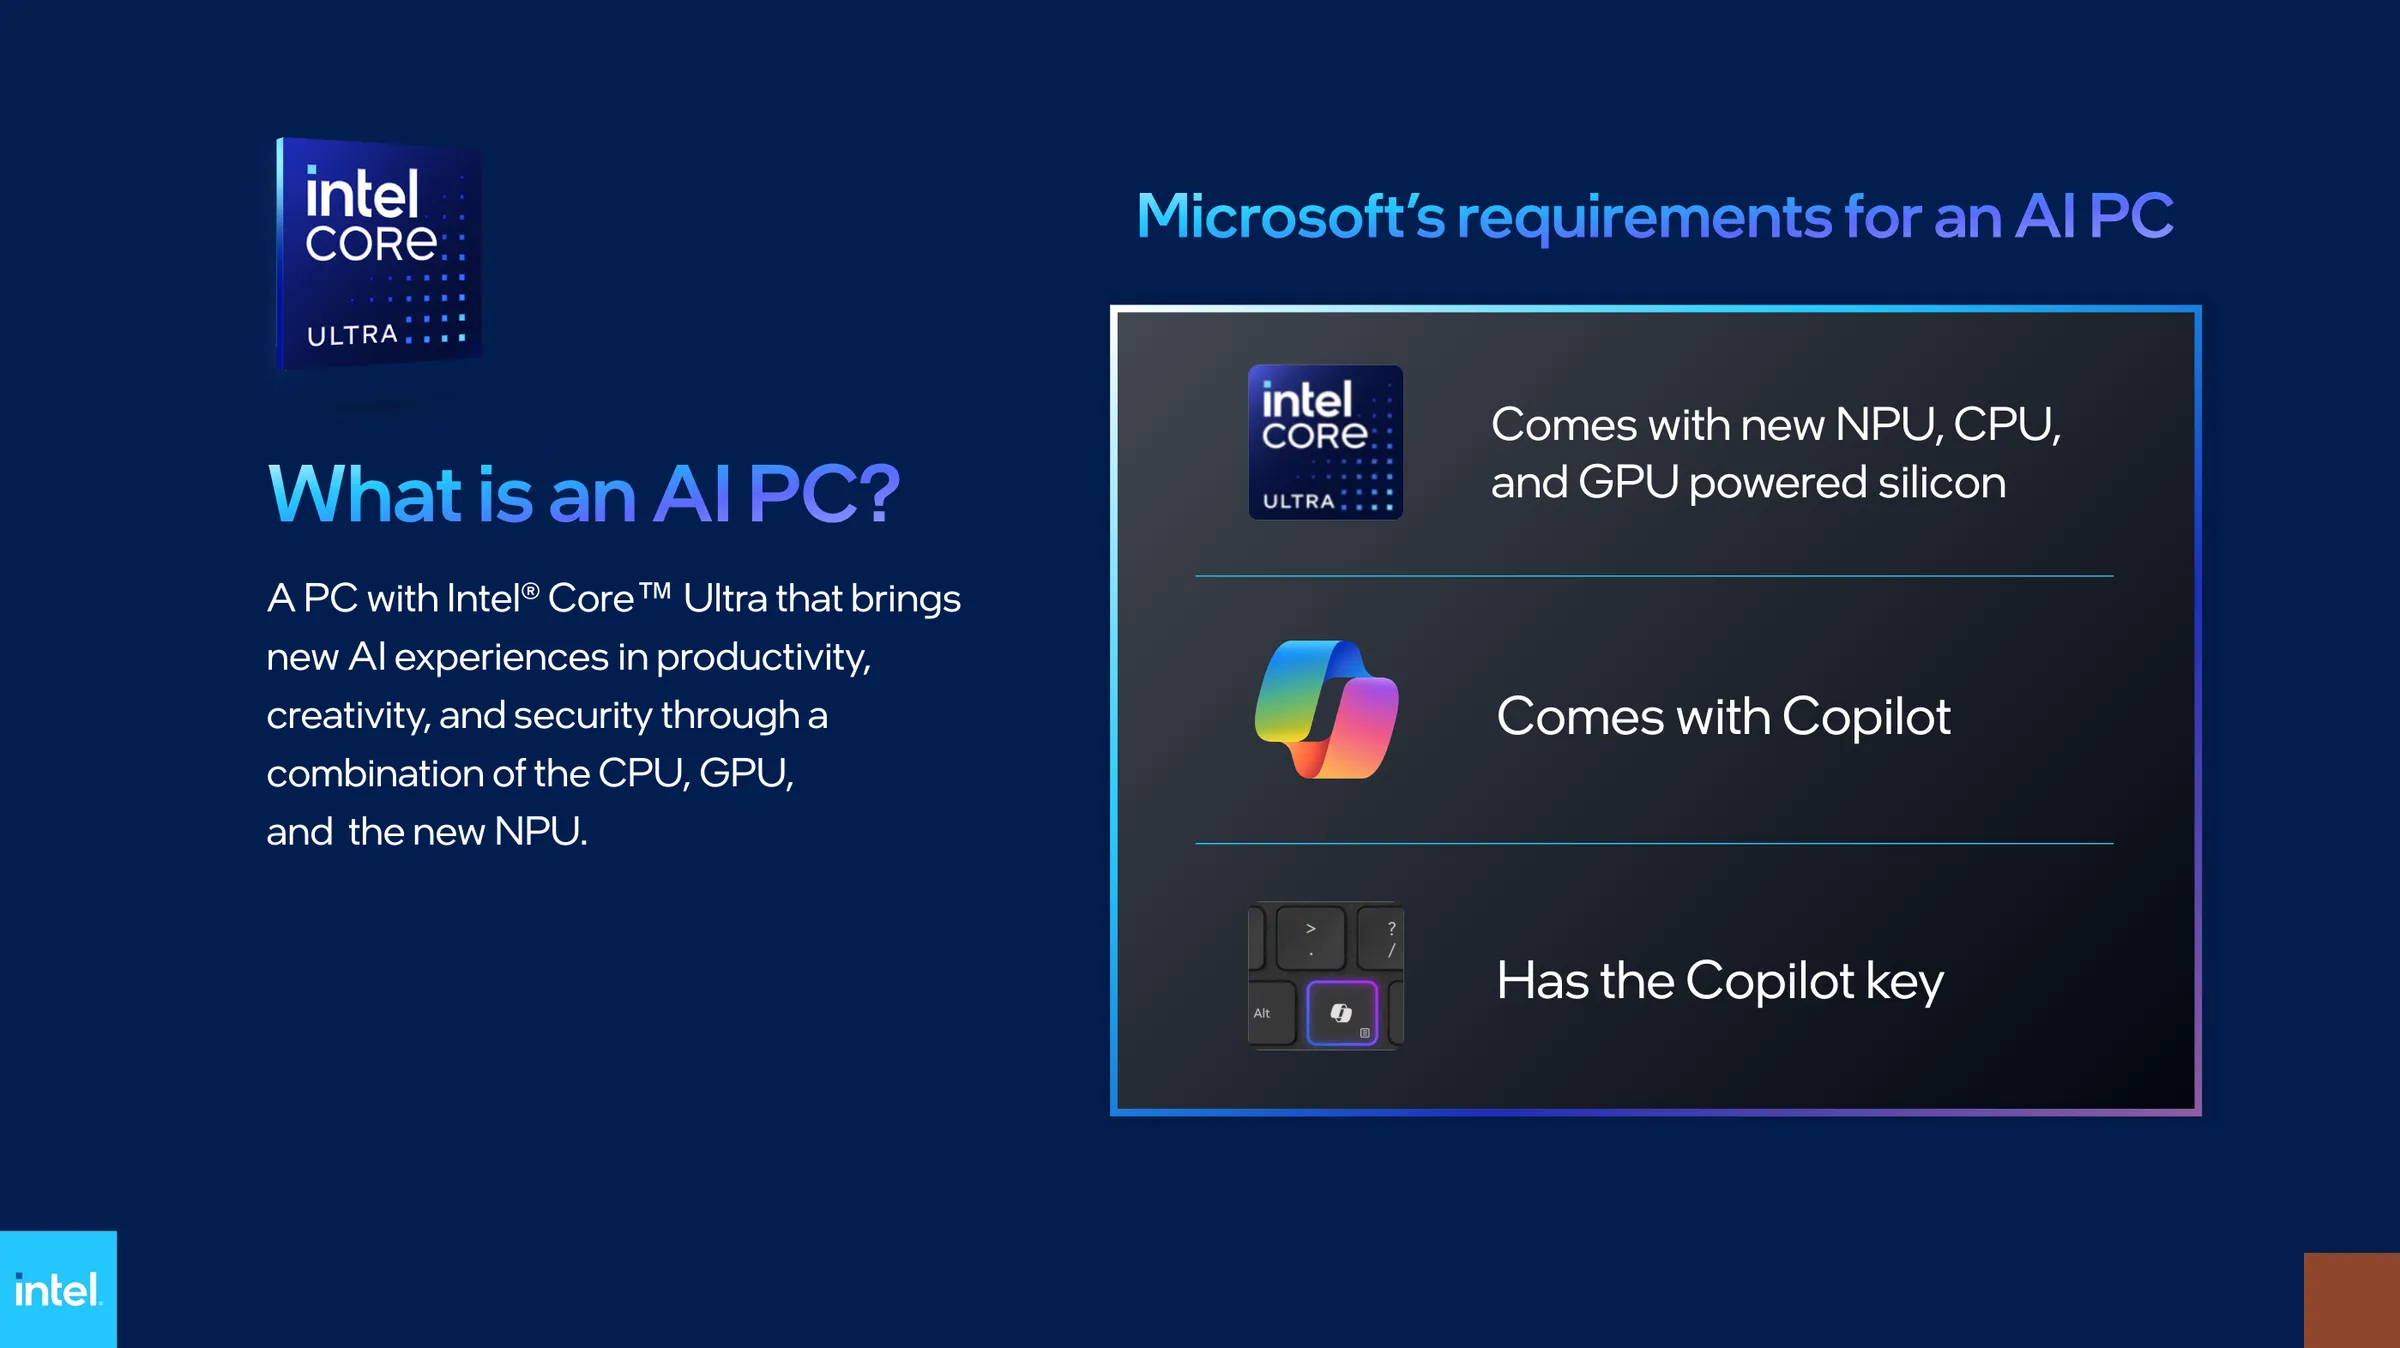 Intel datasheet showing requirements for a Microsoft AI PC.